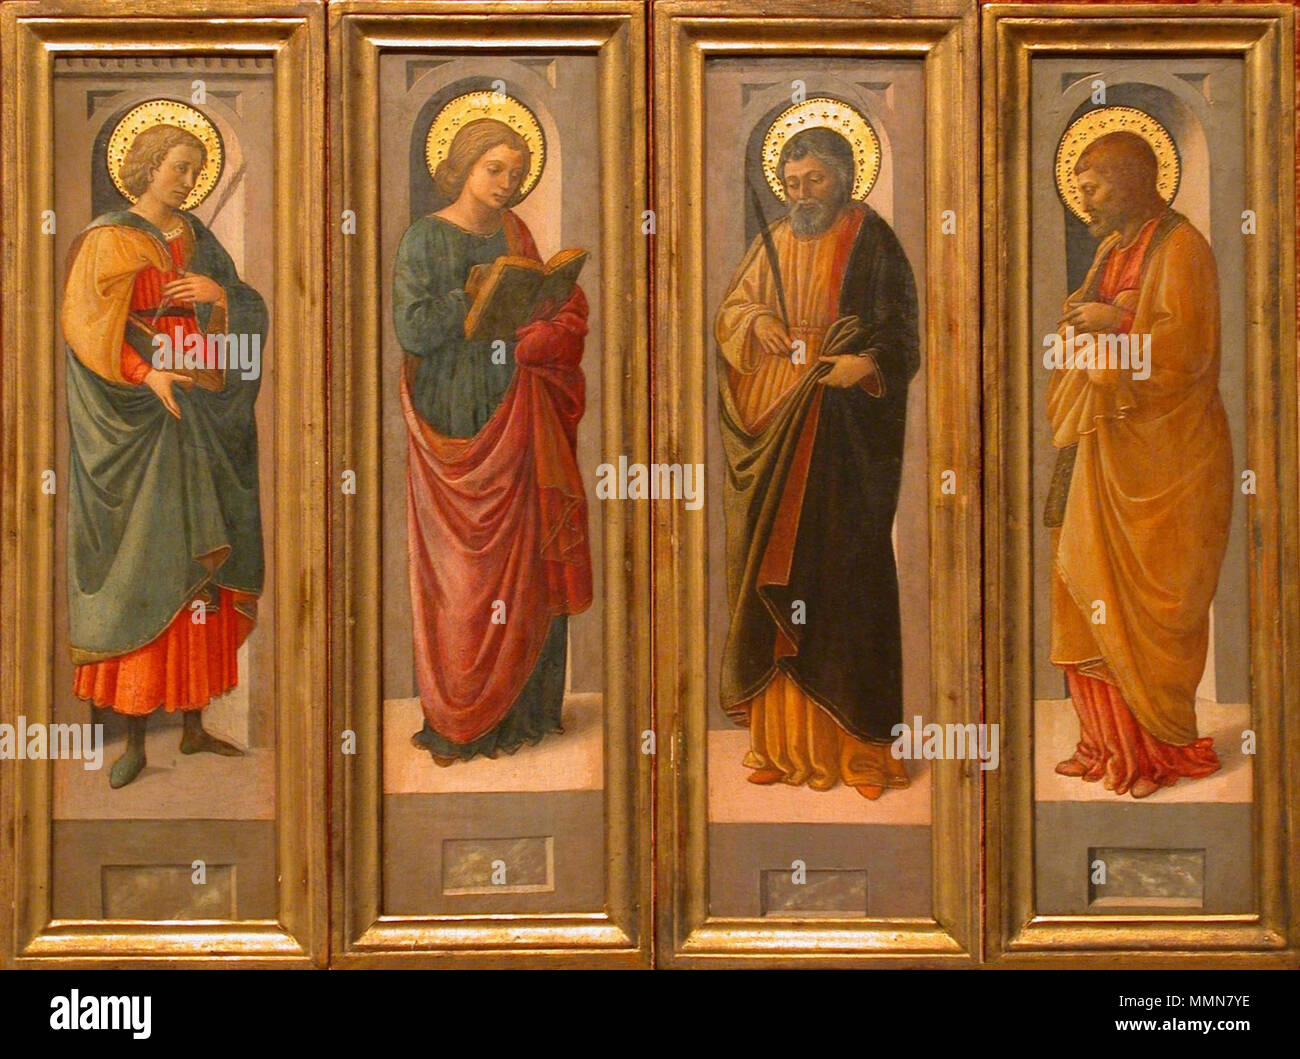 English: Four Male Saints . Mid-15th century. 'Four Male Saints, paintings by Fra Diamante, c. 1470, Honolulu Academy of Arts Stock Photo